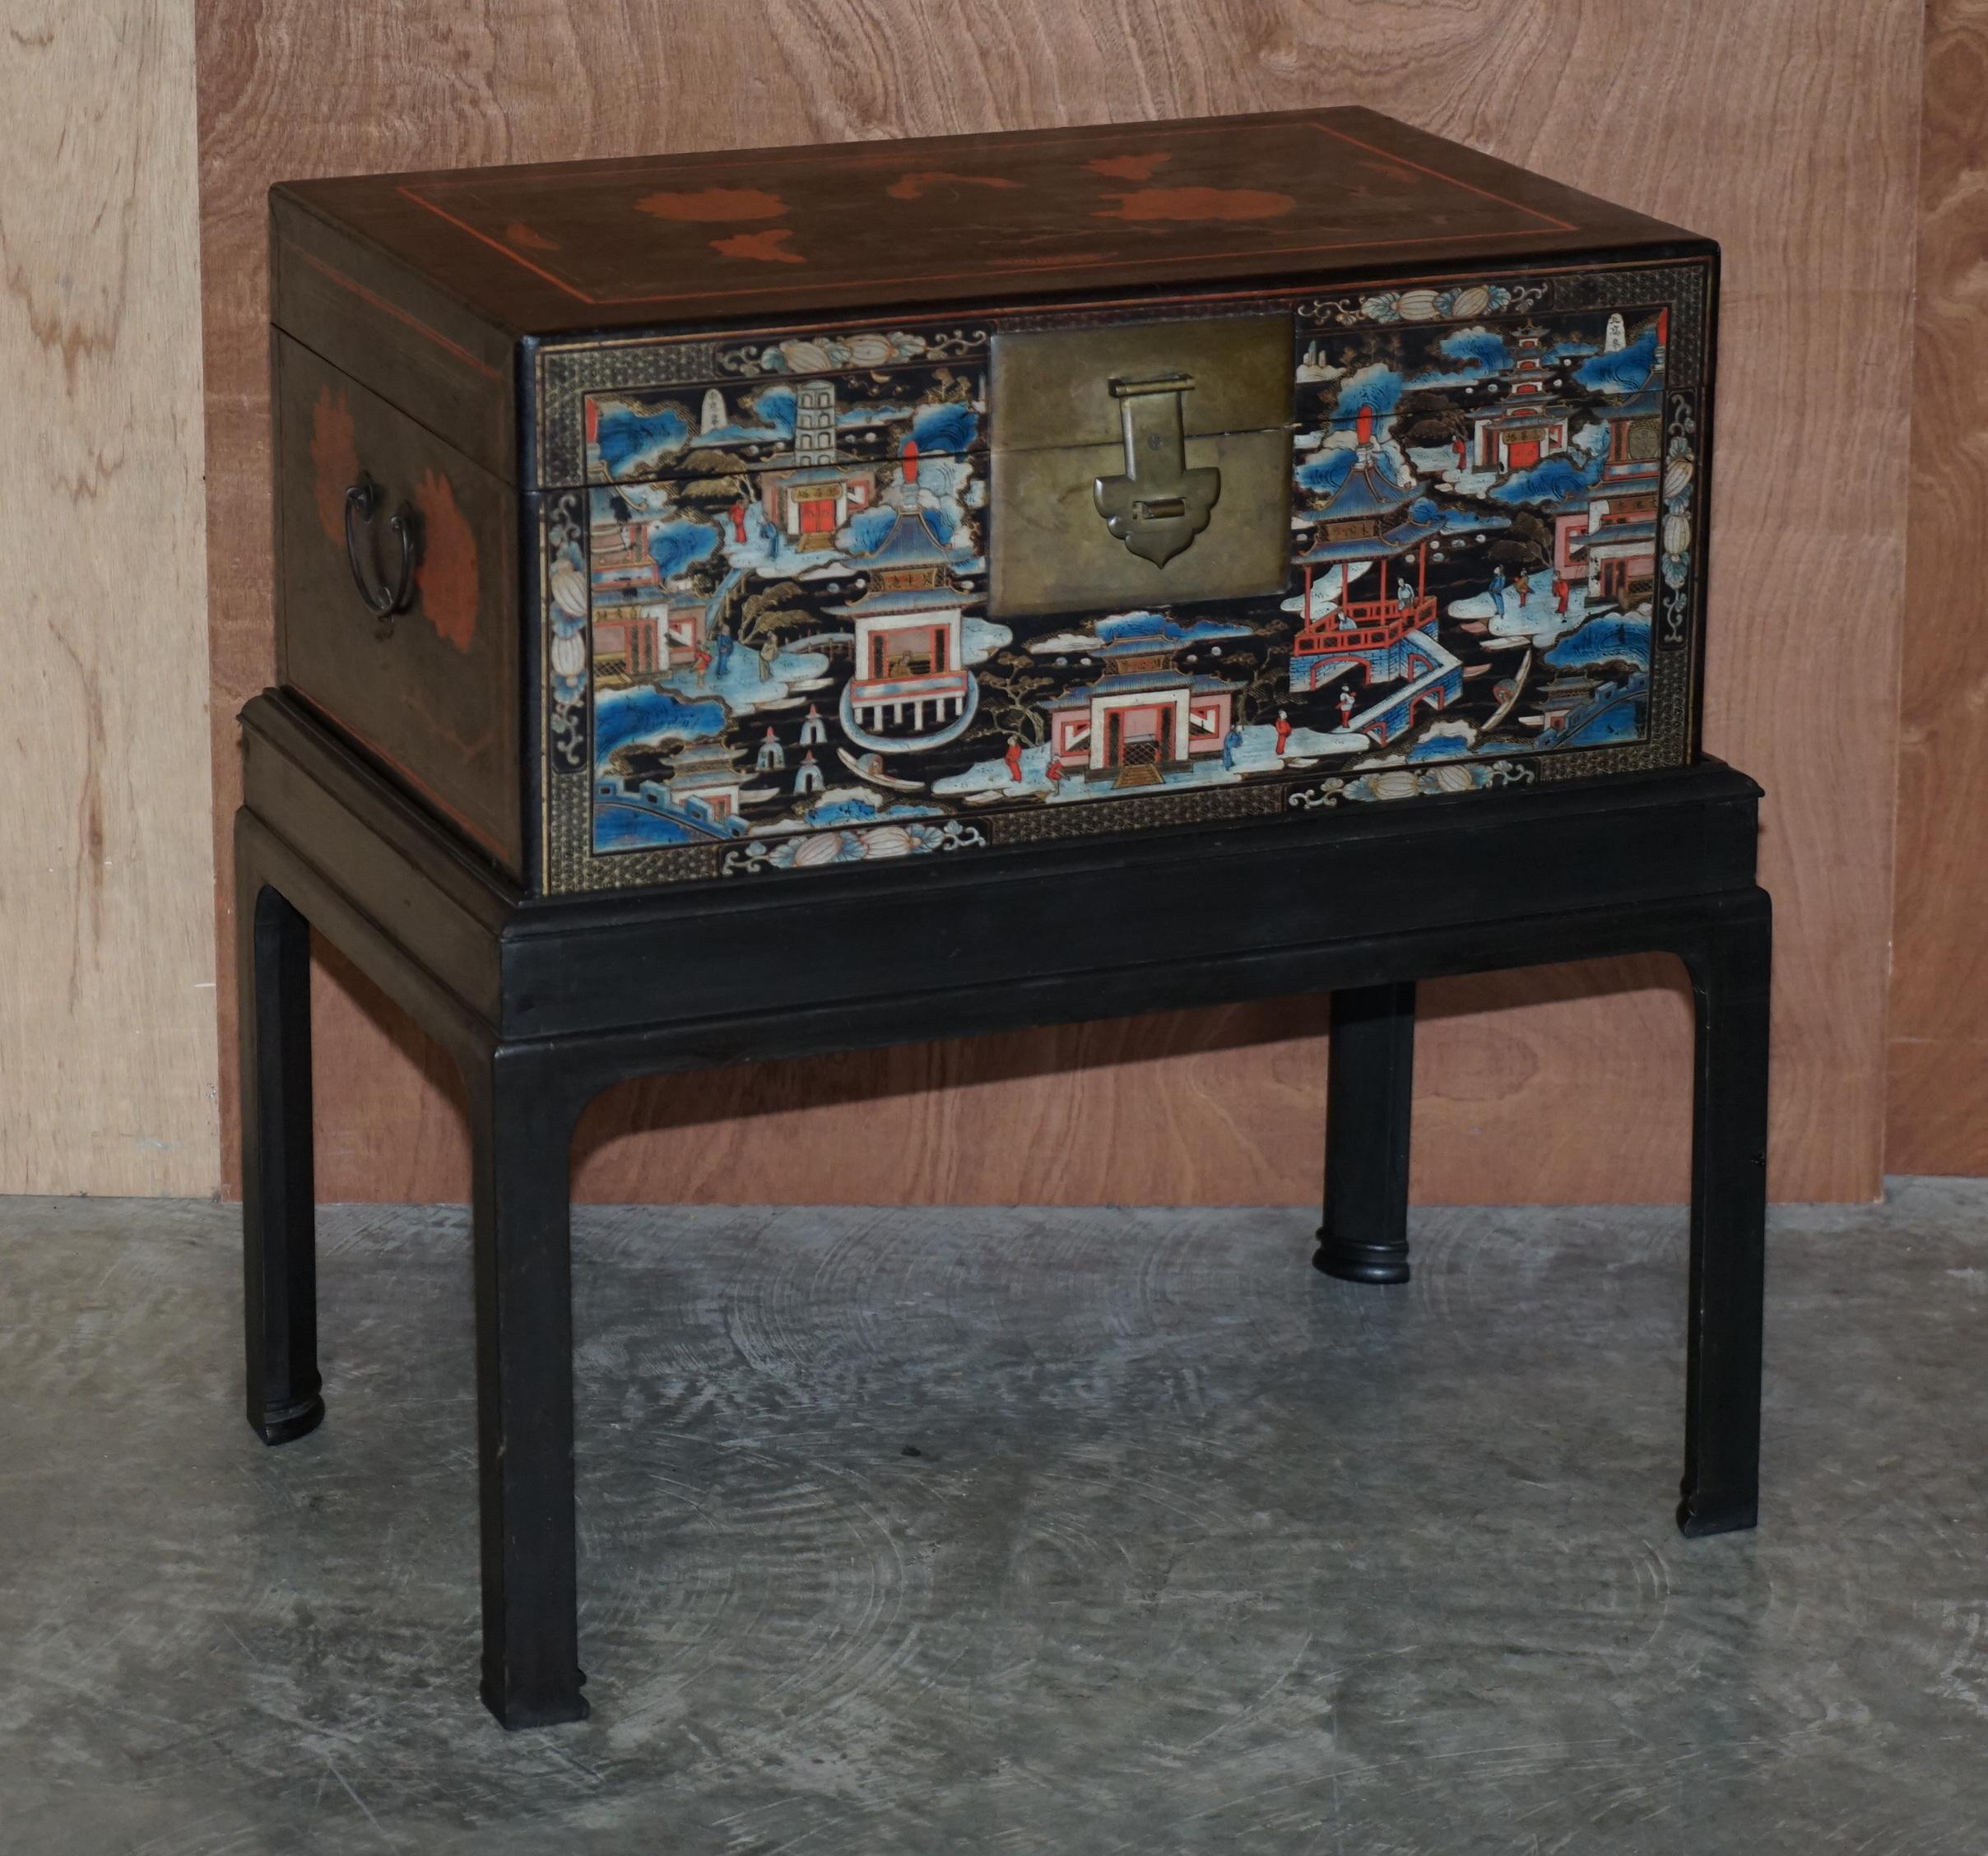 We are delighted to offer this lovely pair of original hand painted vintage Chinese trunks on stands which can be used as very large side tables

A very finely decorated pair, they are very large for the type and look expensive and important in